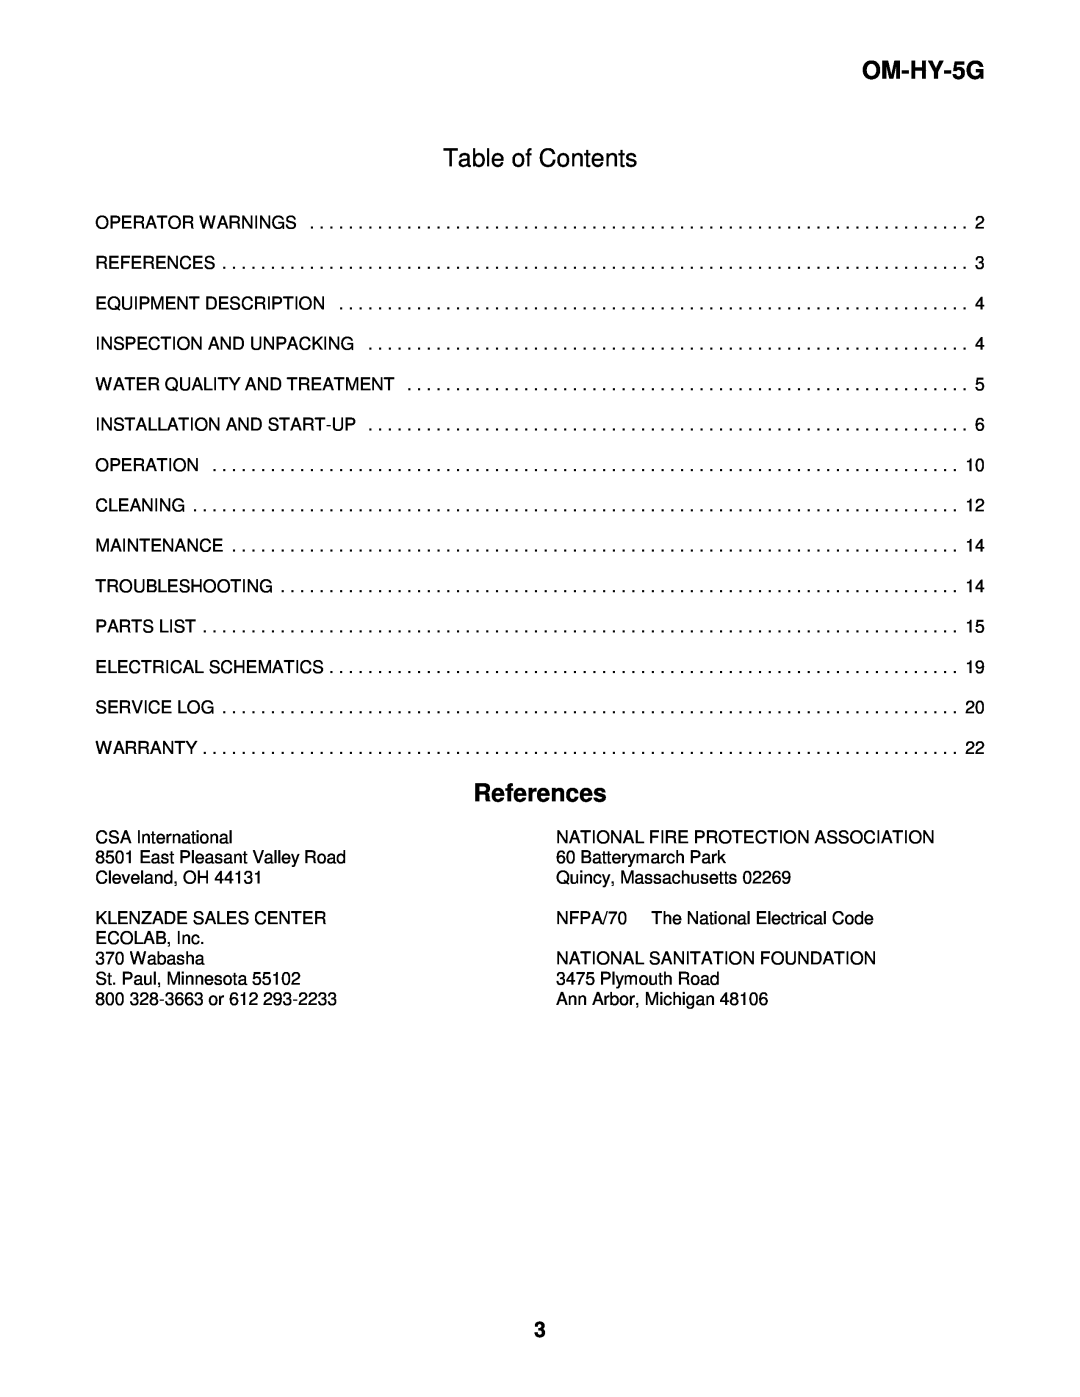 Unified Brands (2)HY-5G manual Table of Contents, References, OM-HY-5G 